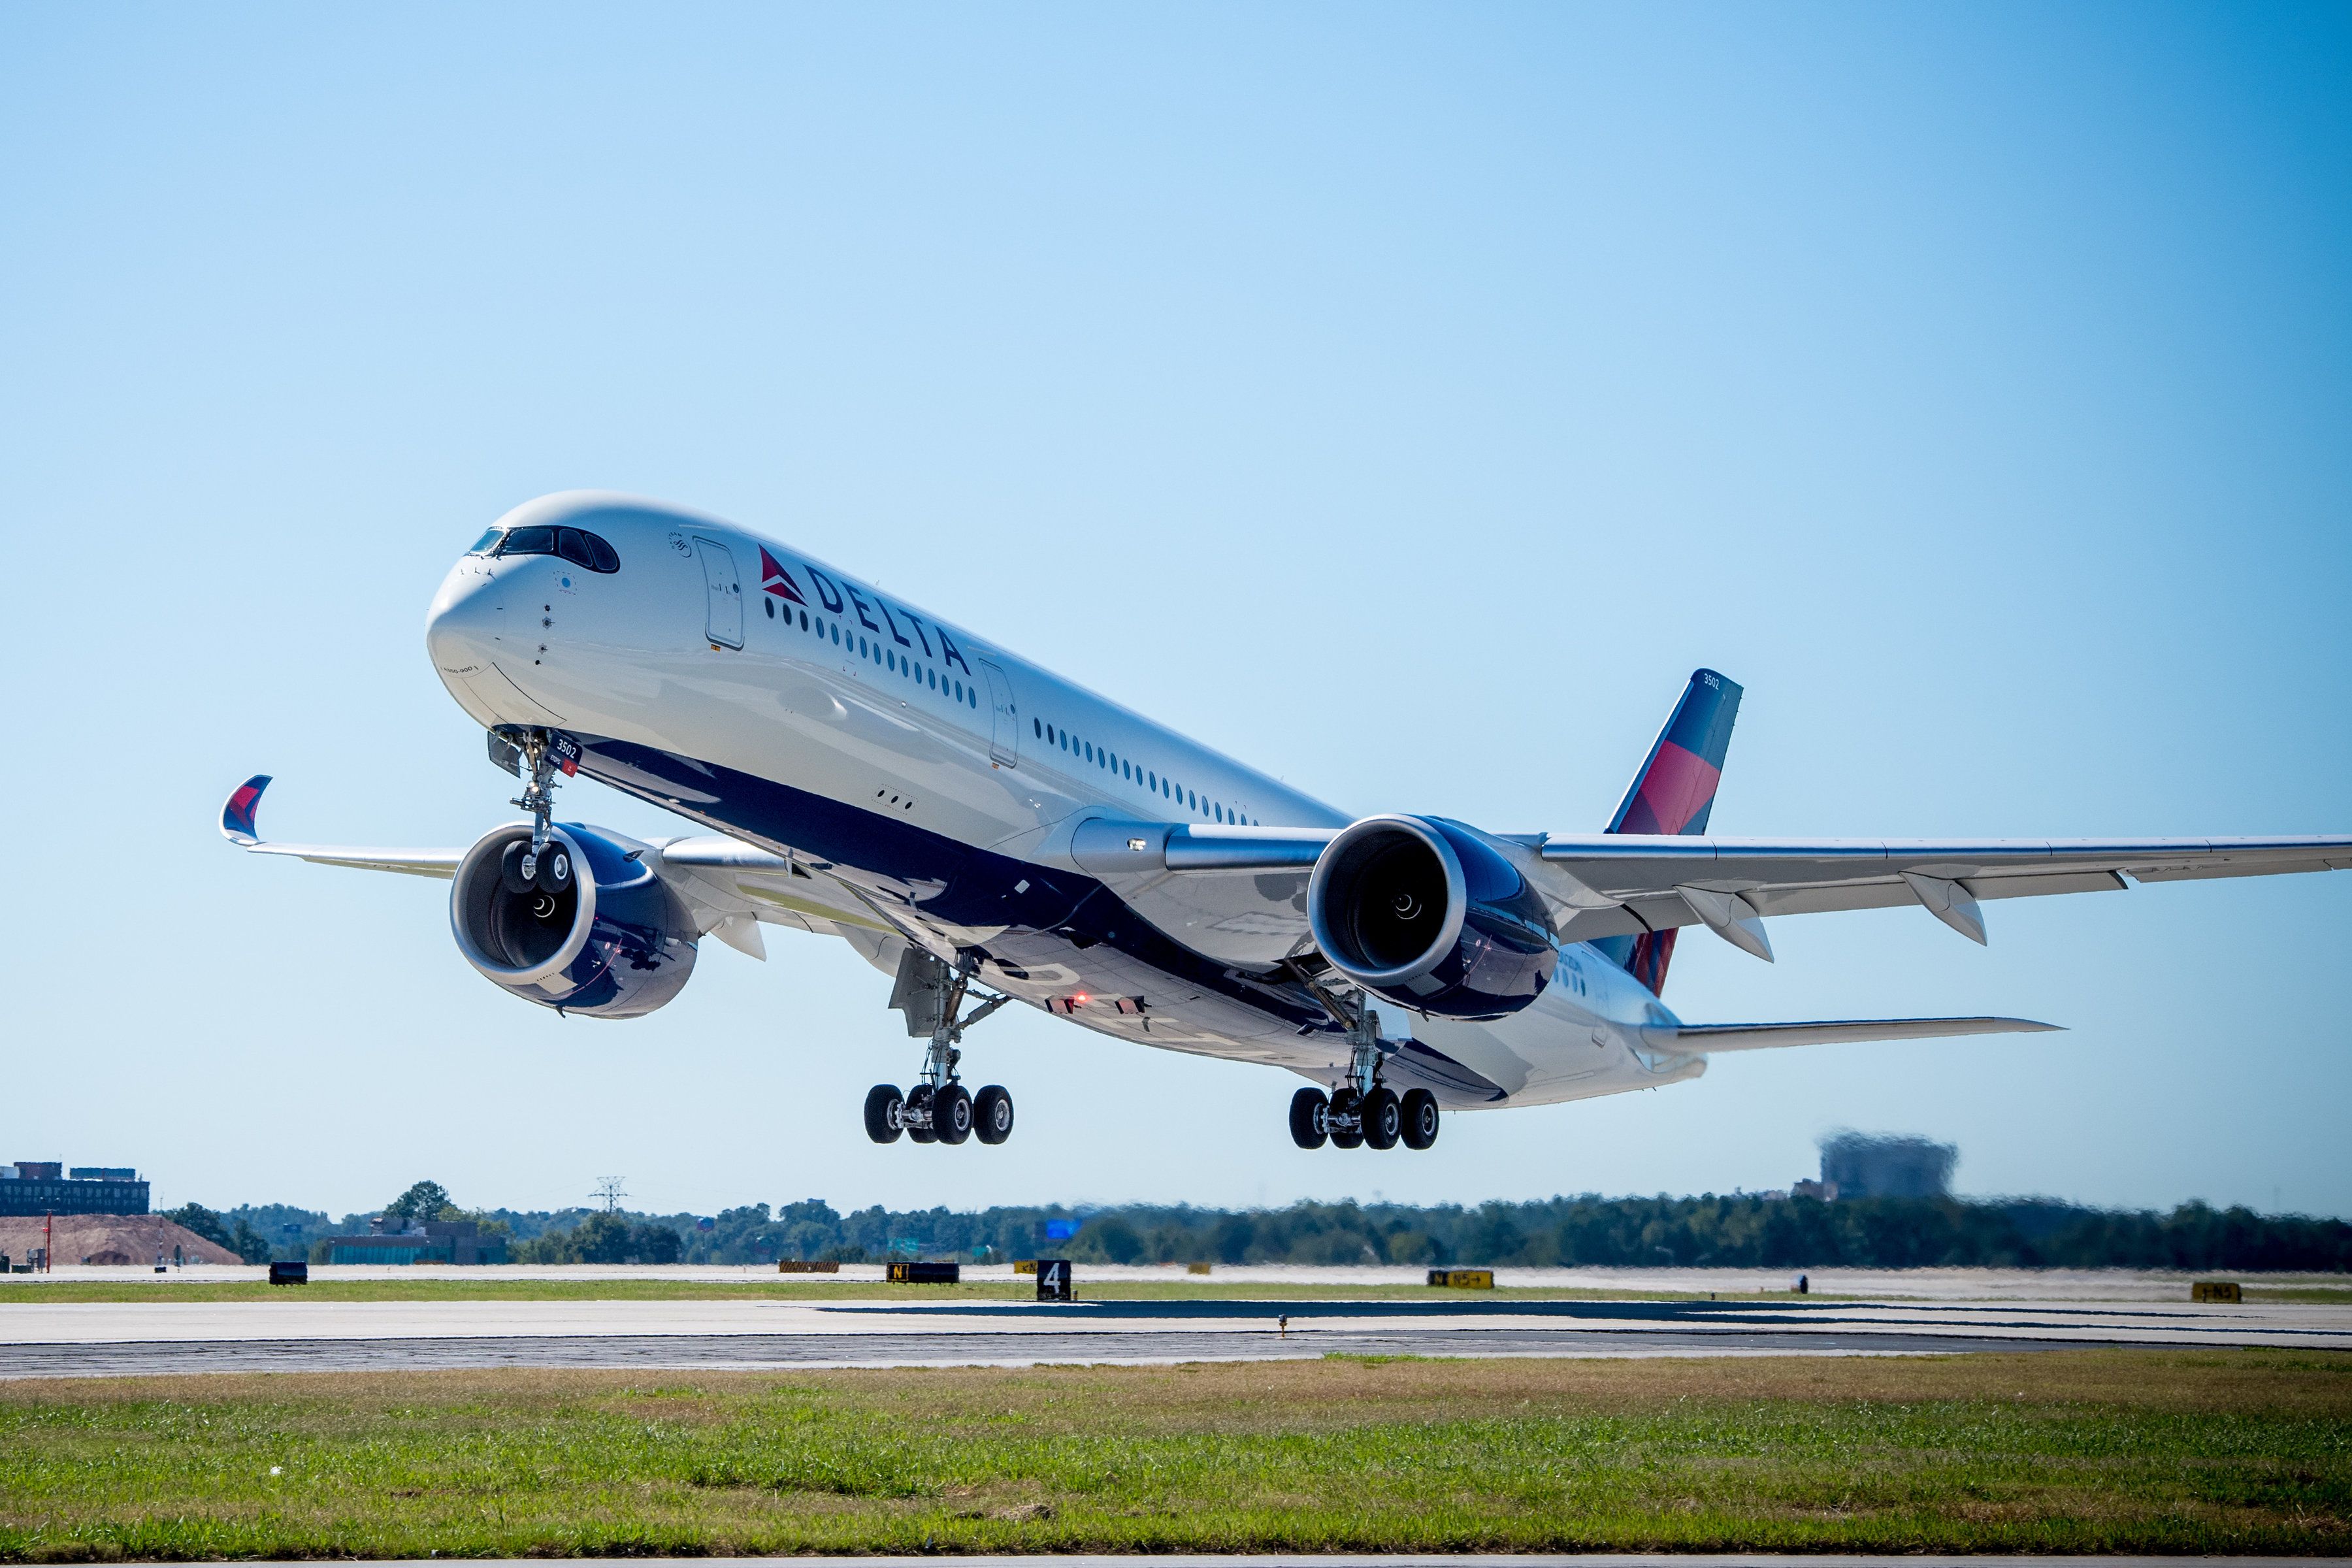 Delta Air Lines Airbus A350-900 taking off.